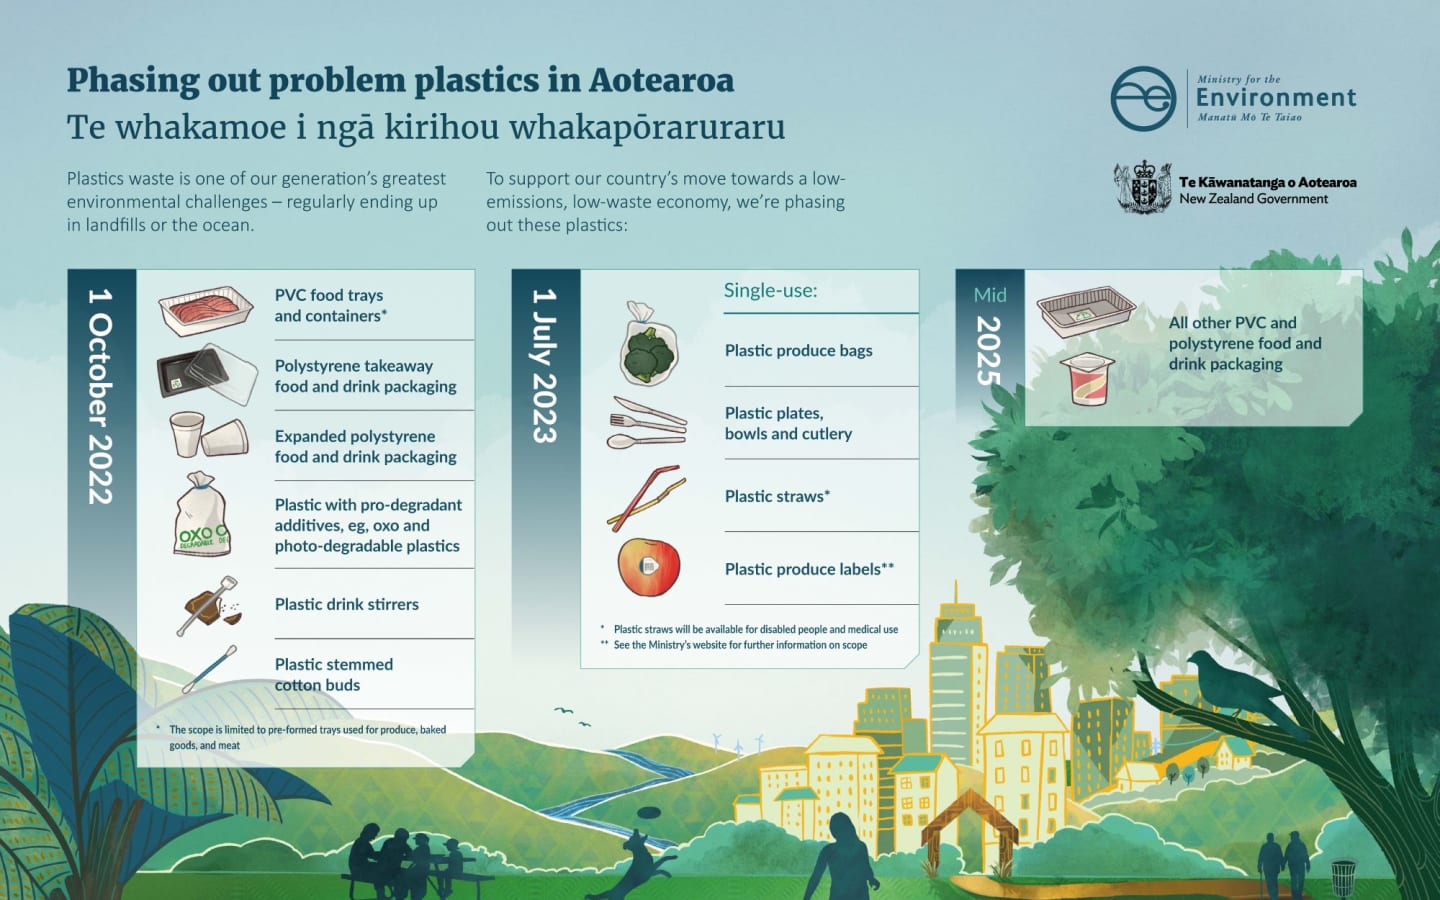 Graphic showing timeframe for phasing out problem plastics in Aotearoa.